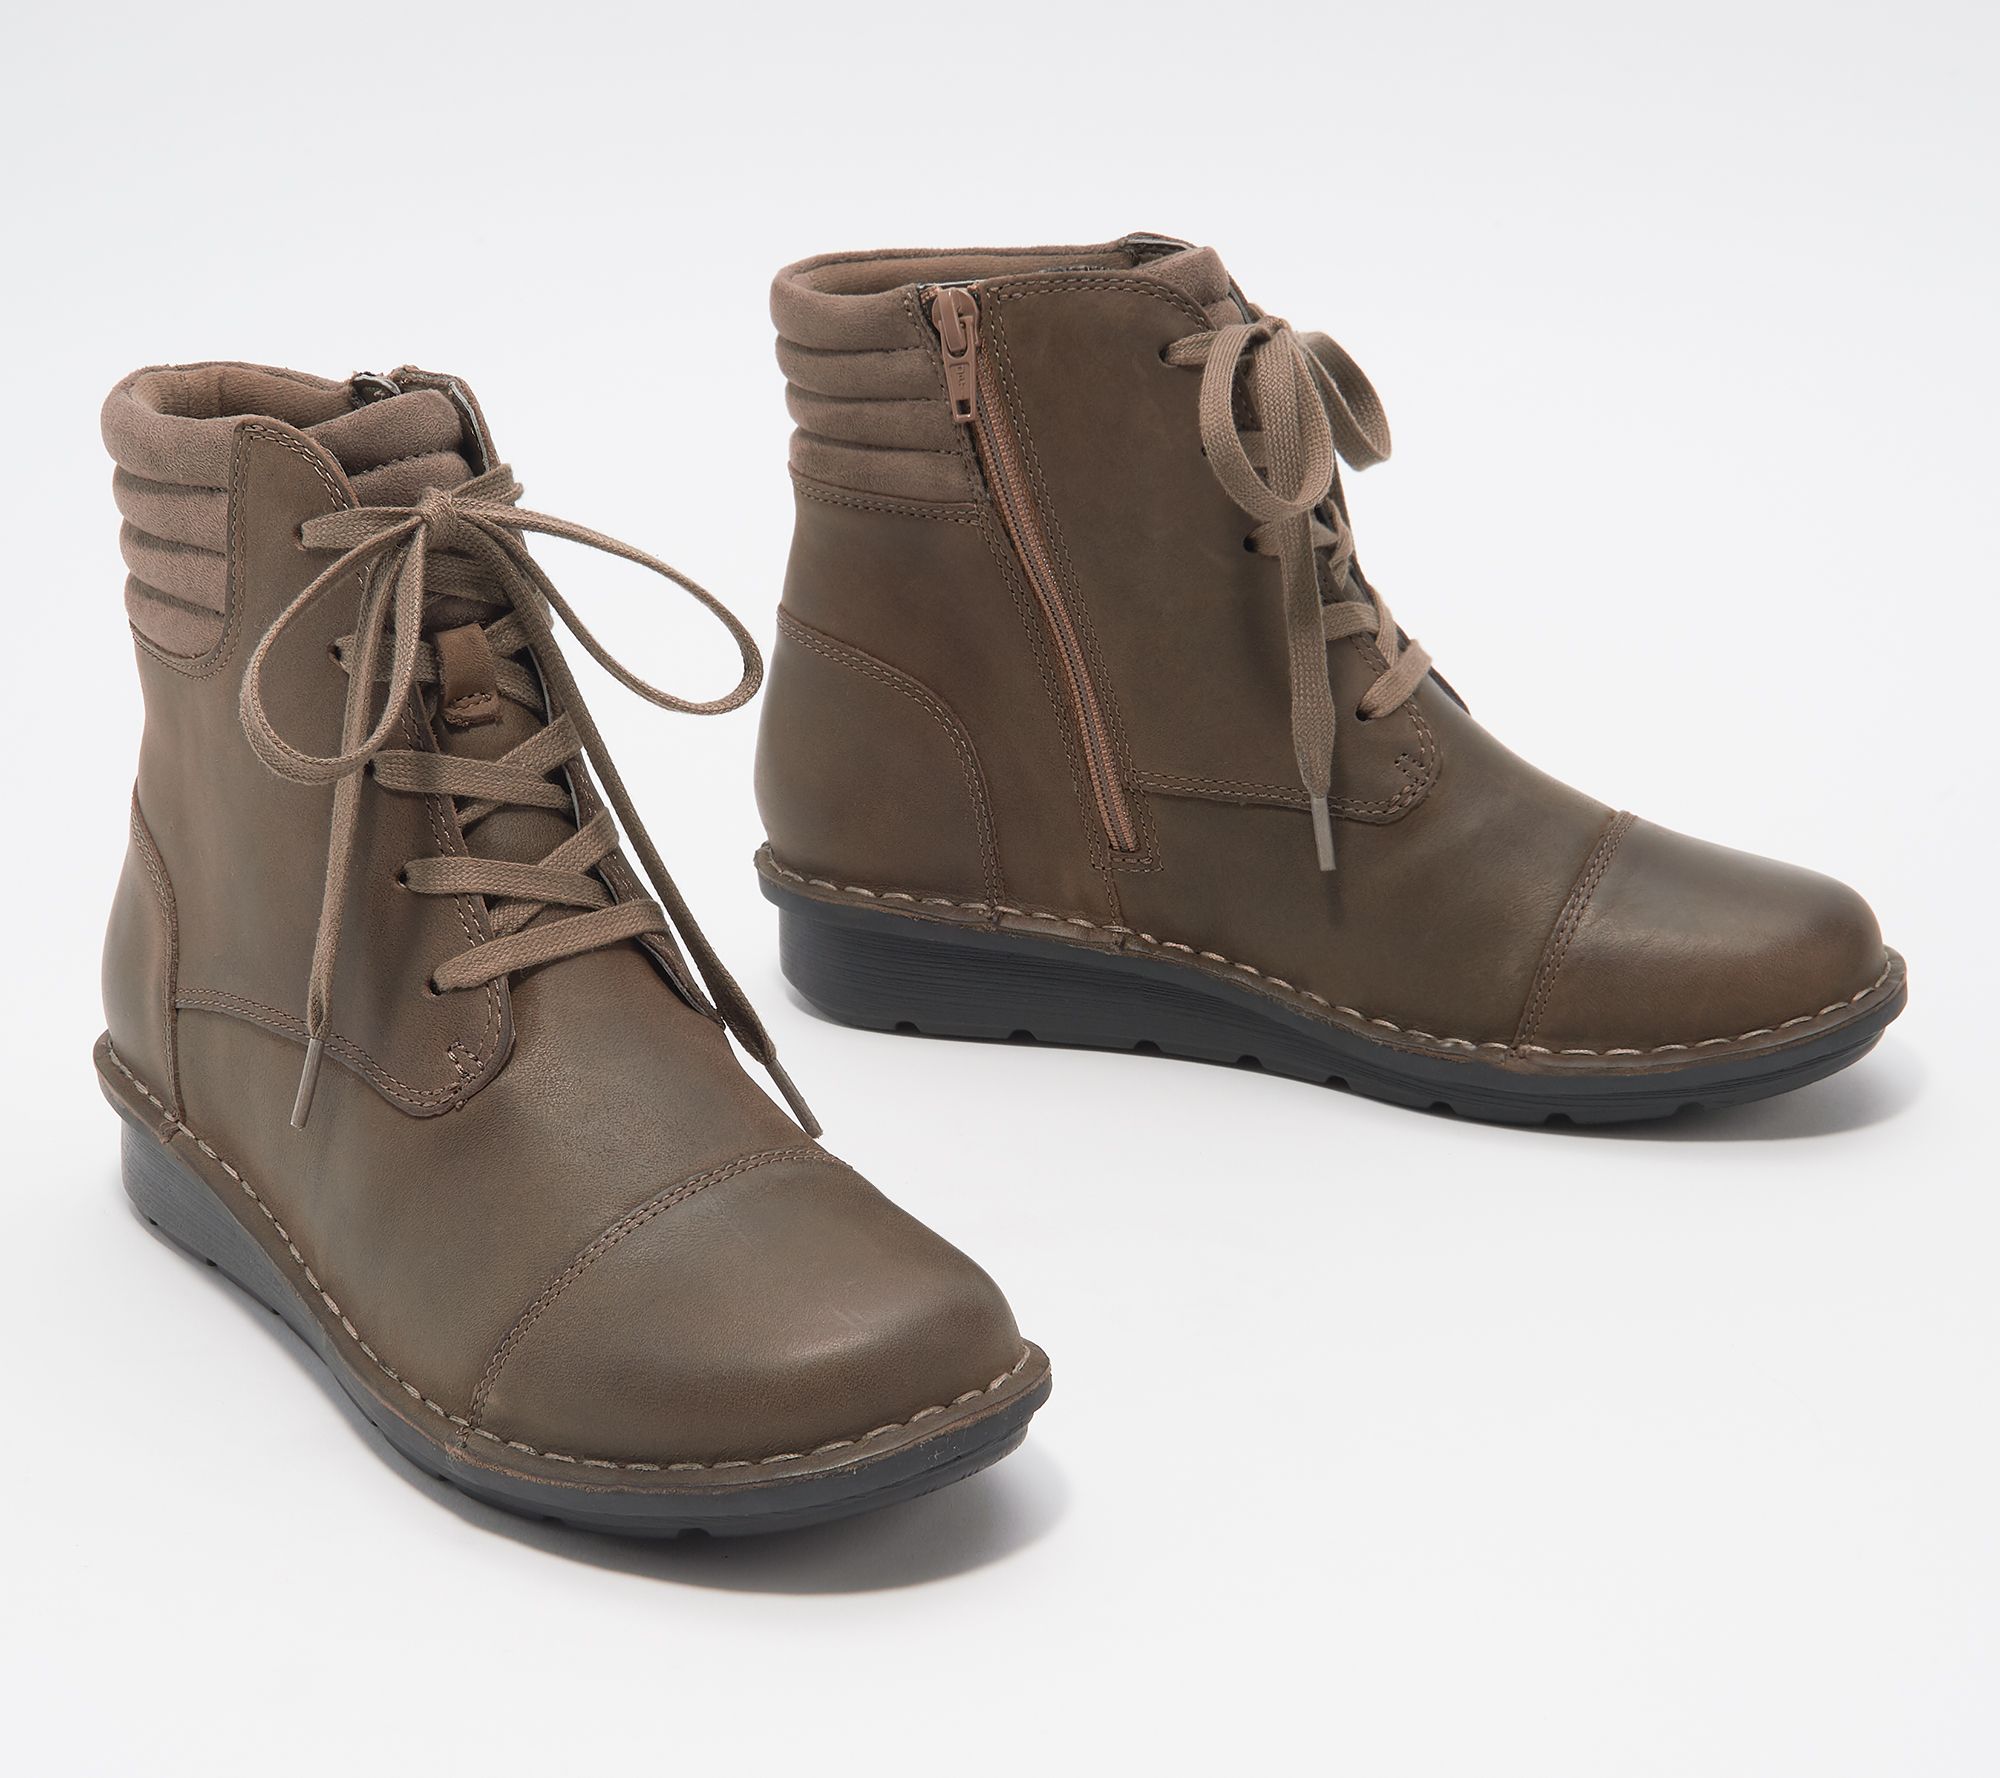 qvc clarks boots clearance